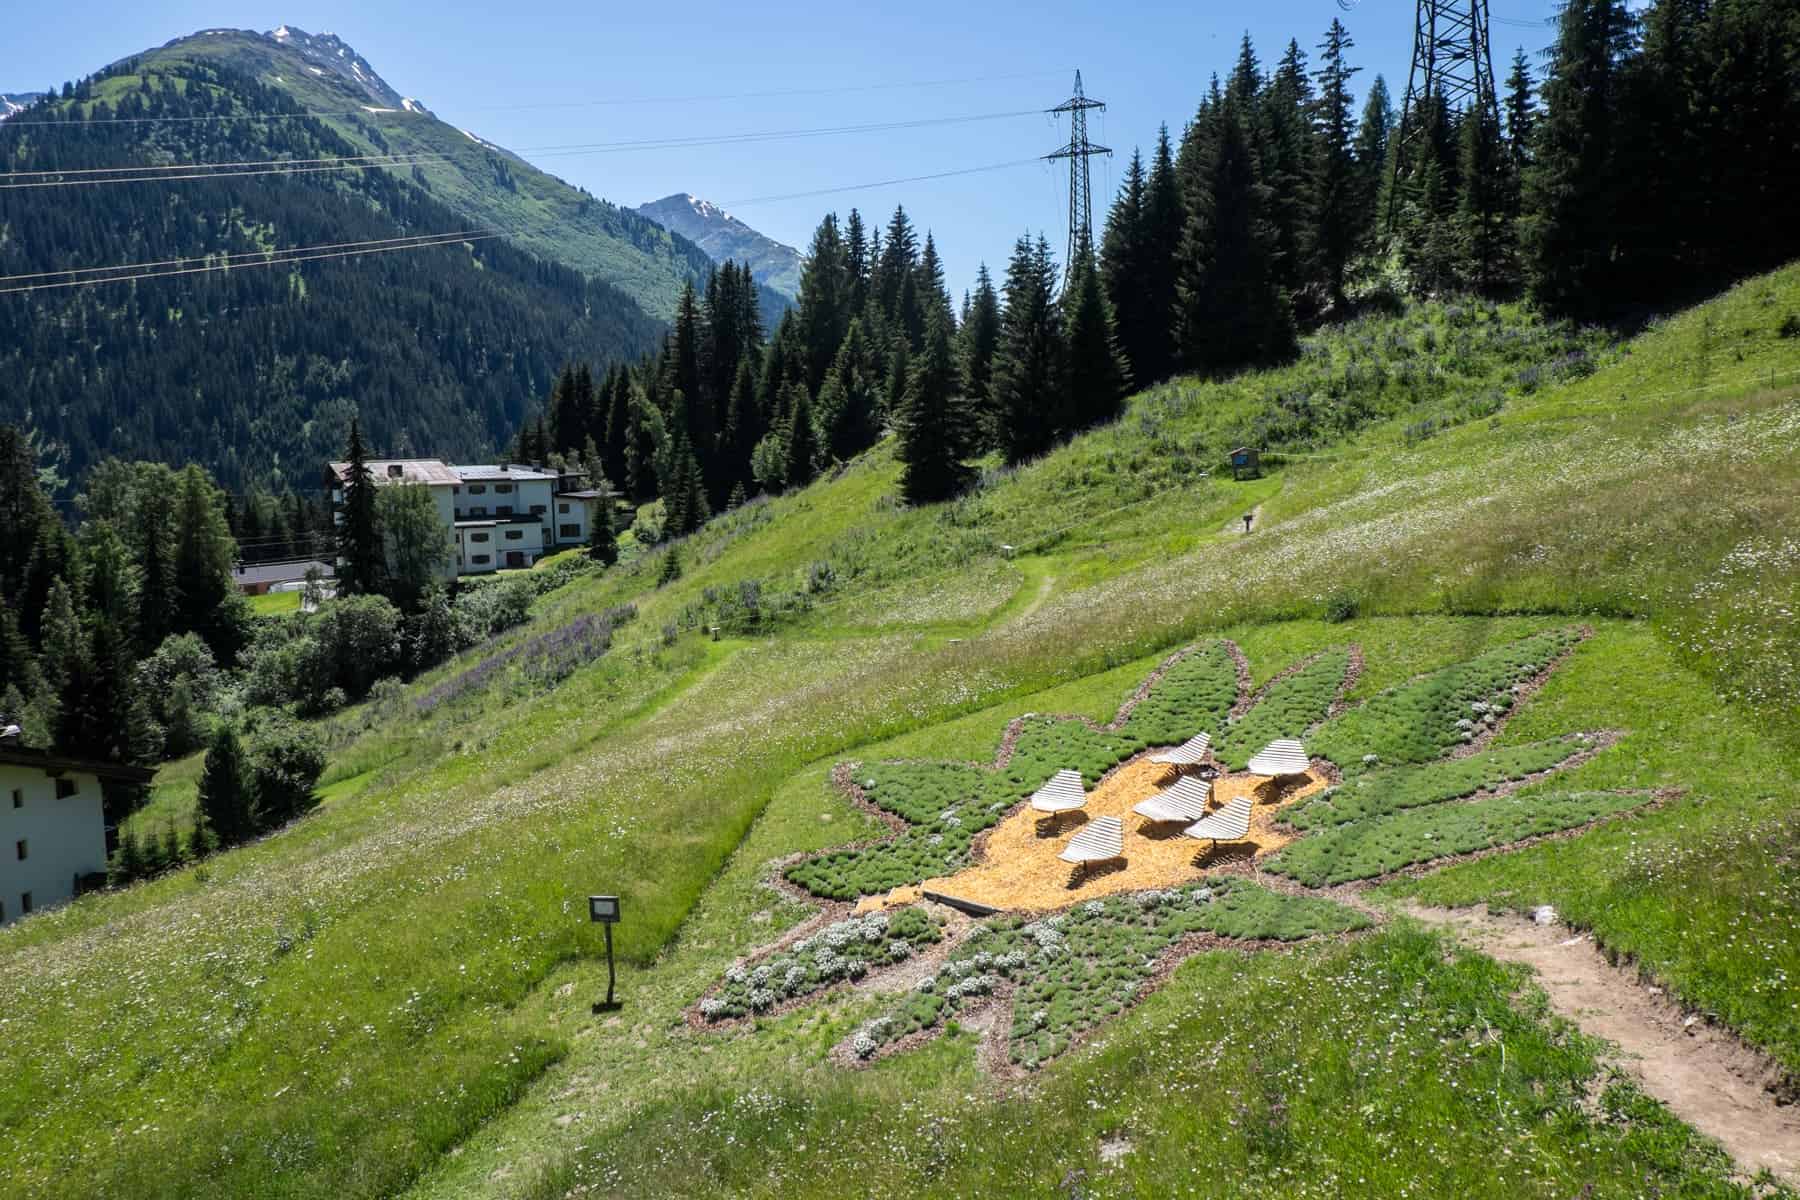 Guinness World Record 100,000 edelweiss plants in the shape of a giant flower on the sloping grounds of the Senn Hütte in St. Anton